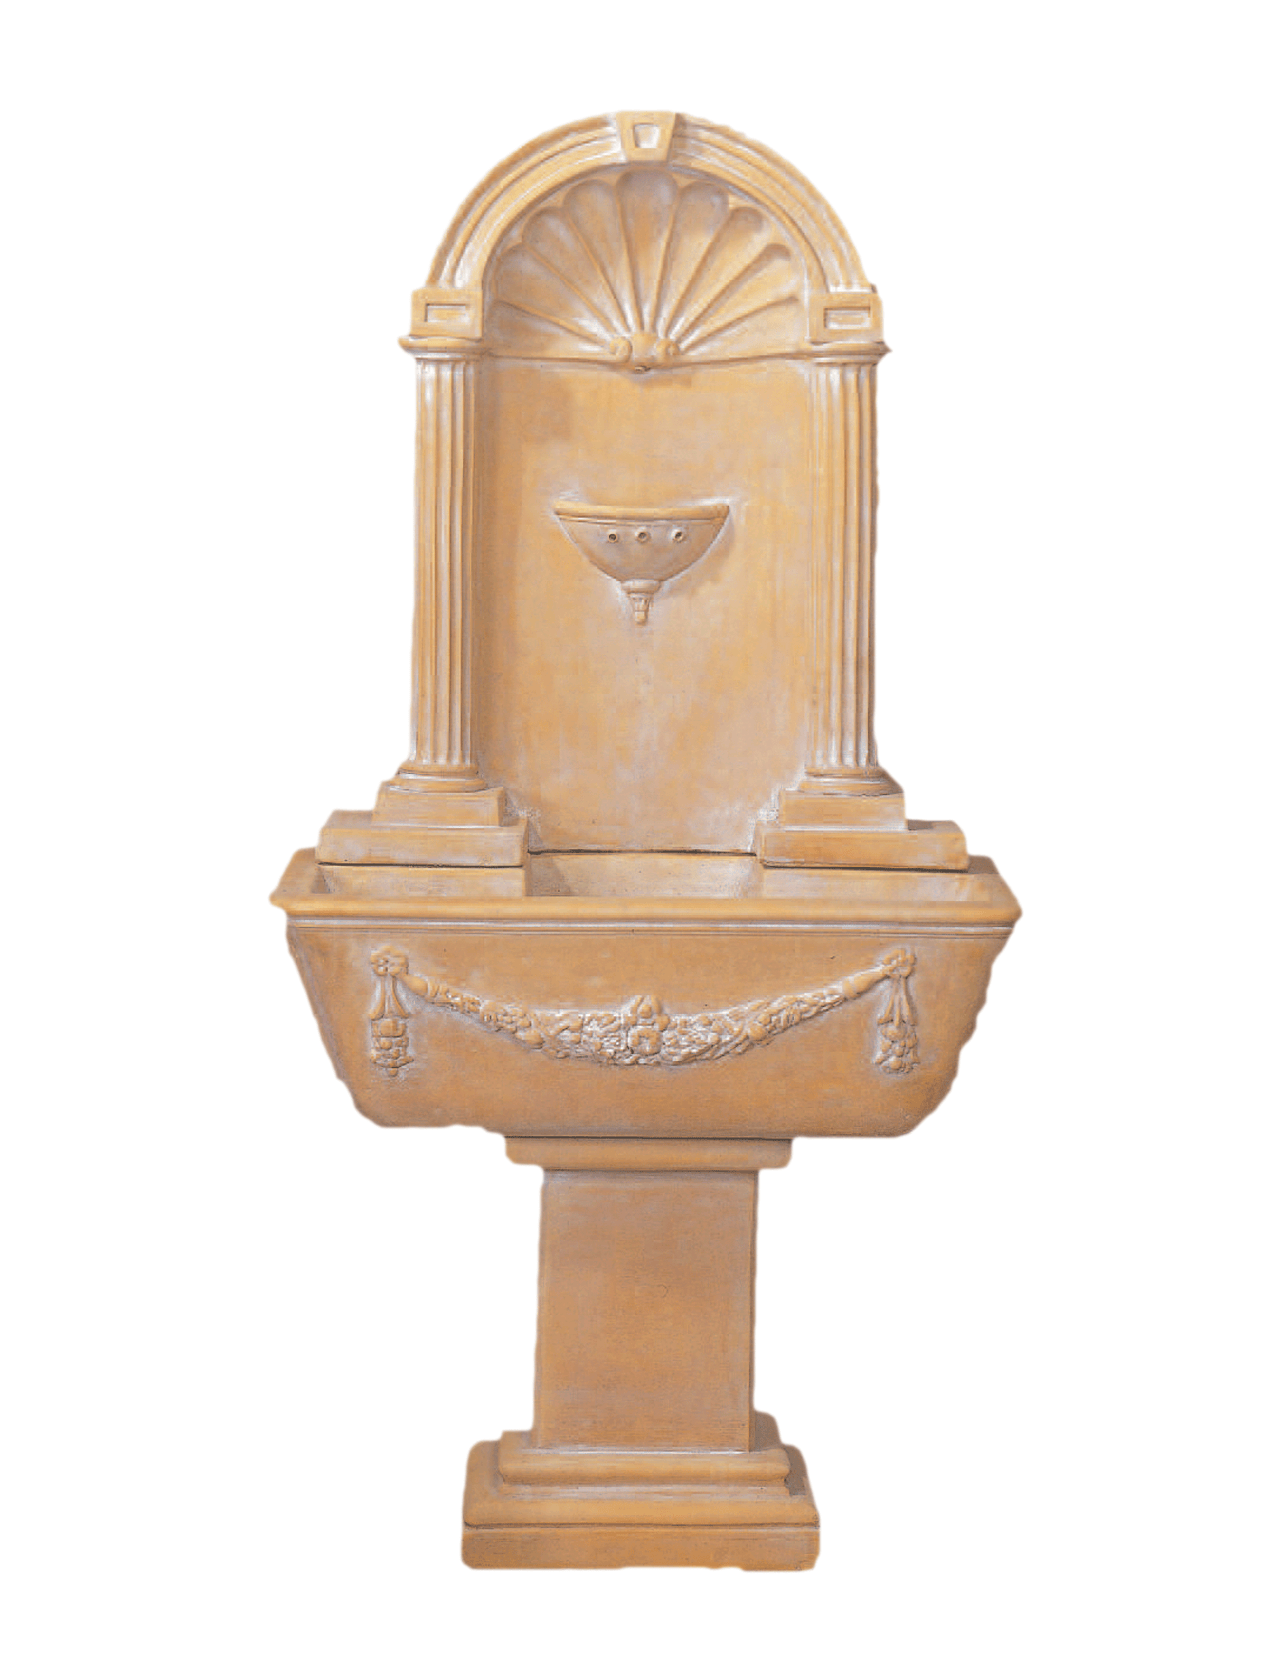 Renaissance Wall Cast Stone Outdoor Garden Fountains With Spout Fountain Tuscan 